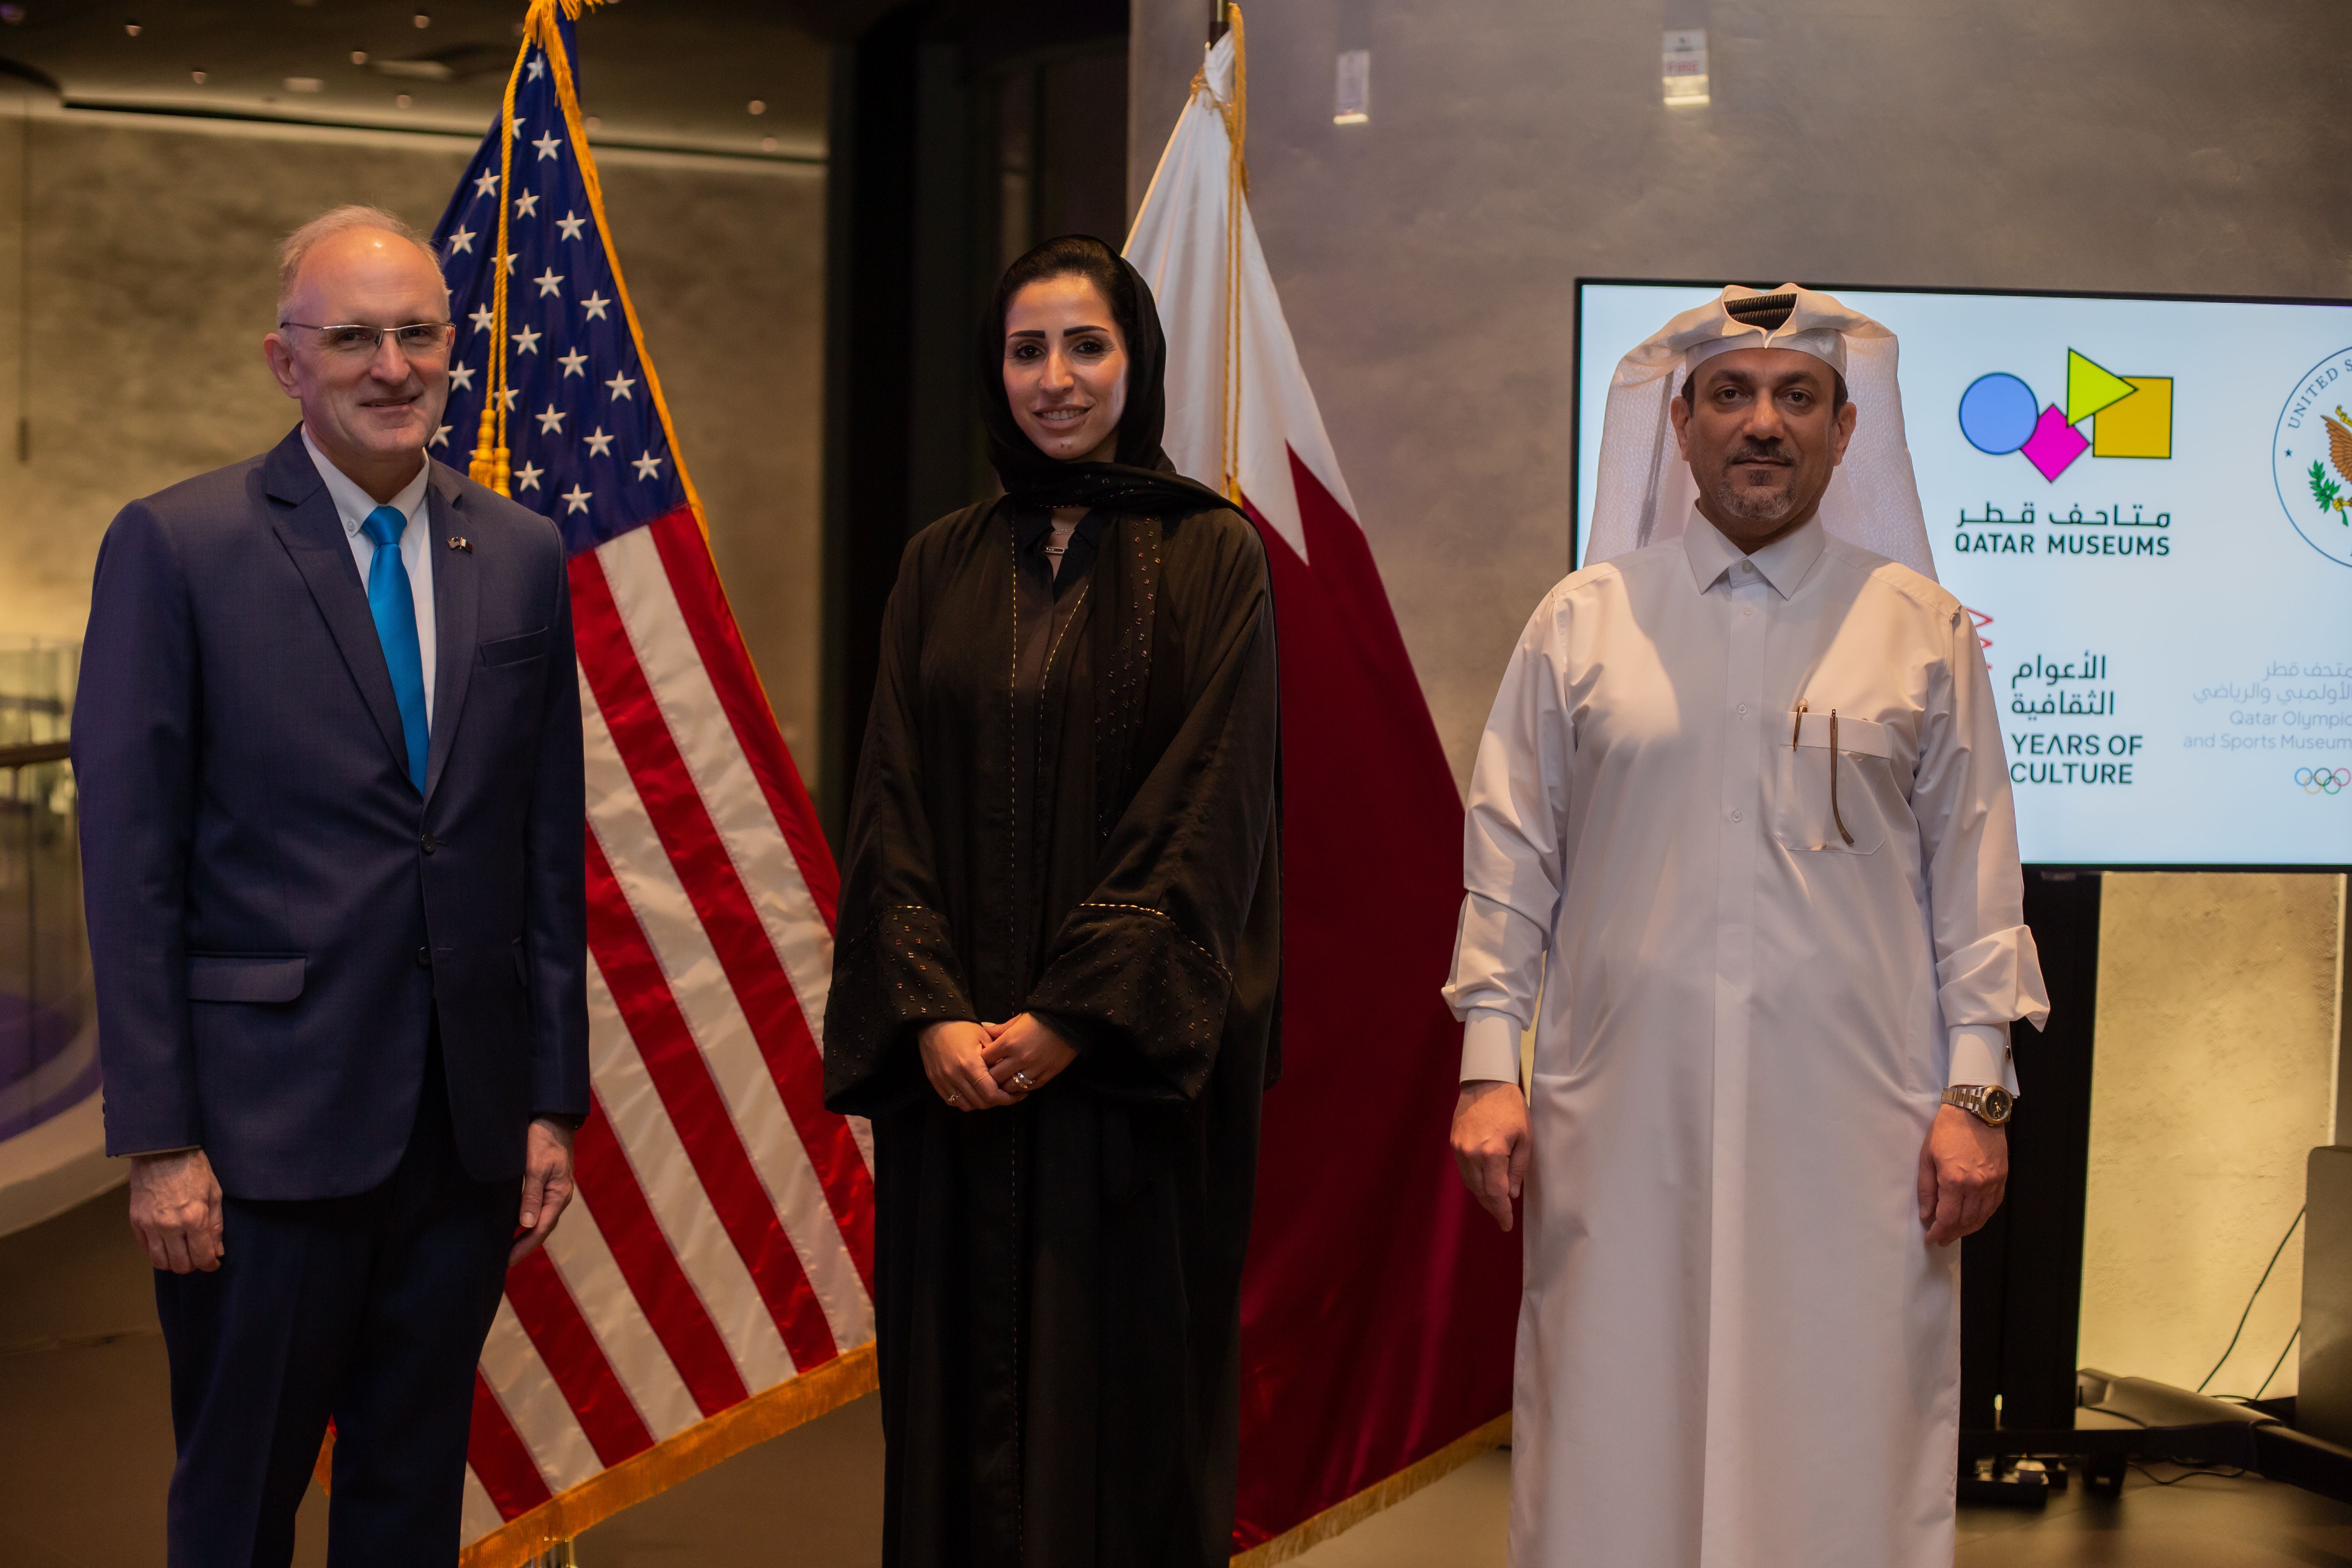 A man in a blue suit beside a man and woman in Qatari clothing, standing and smiling in front of the US and Qatar flags.